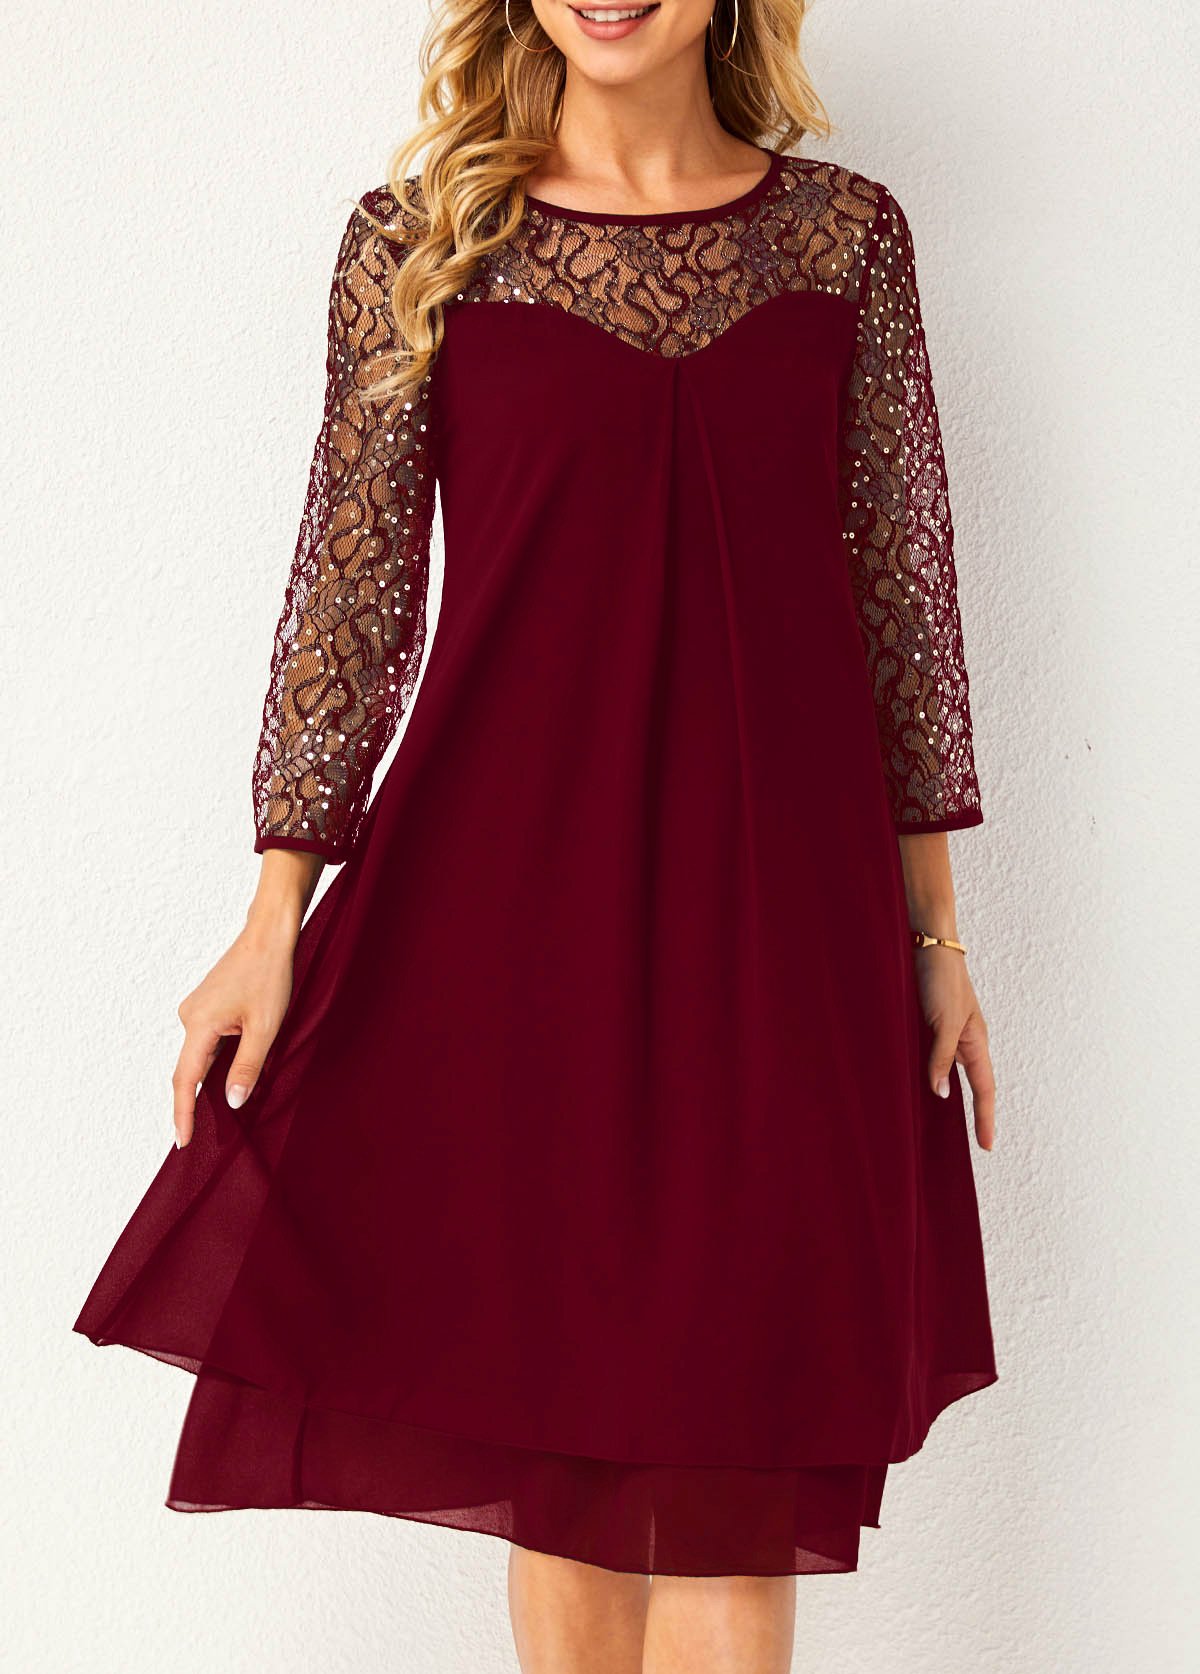 Lace Stitching Sequin Wine Red Dress